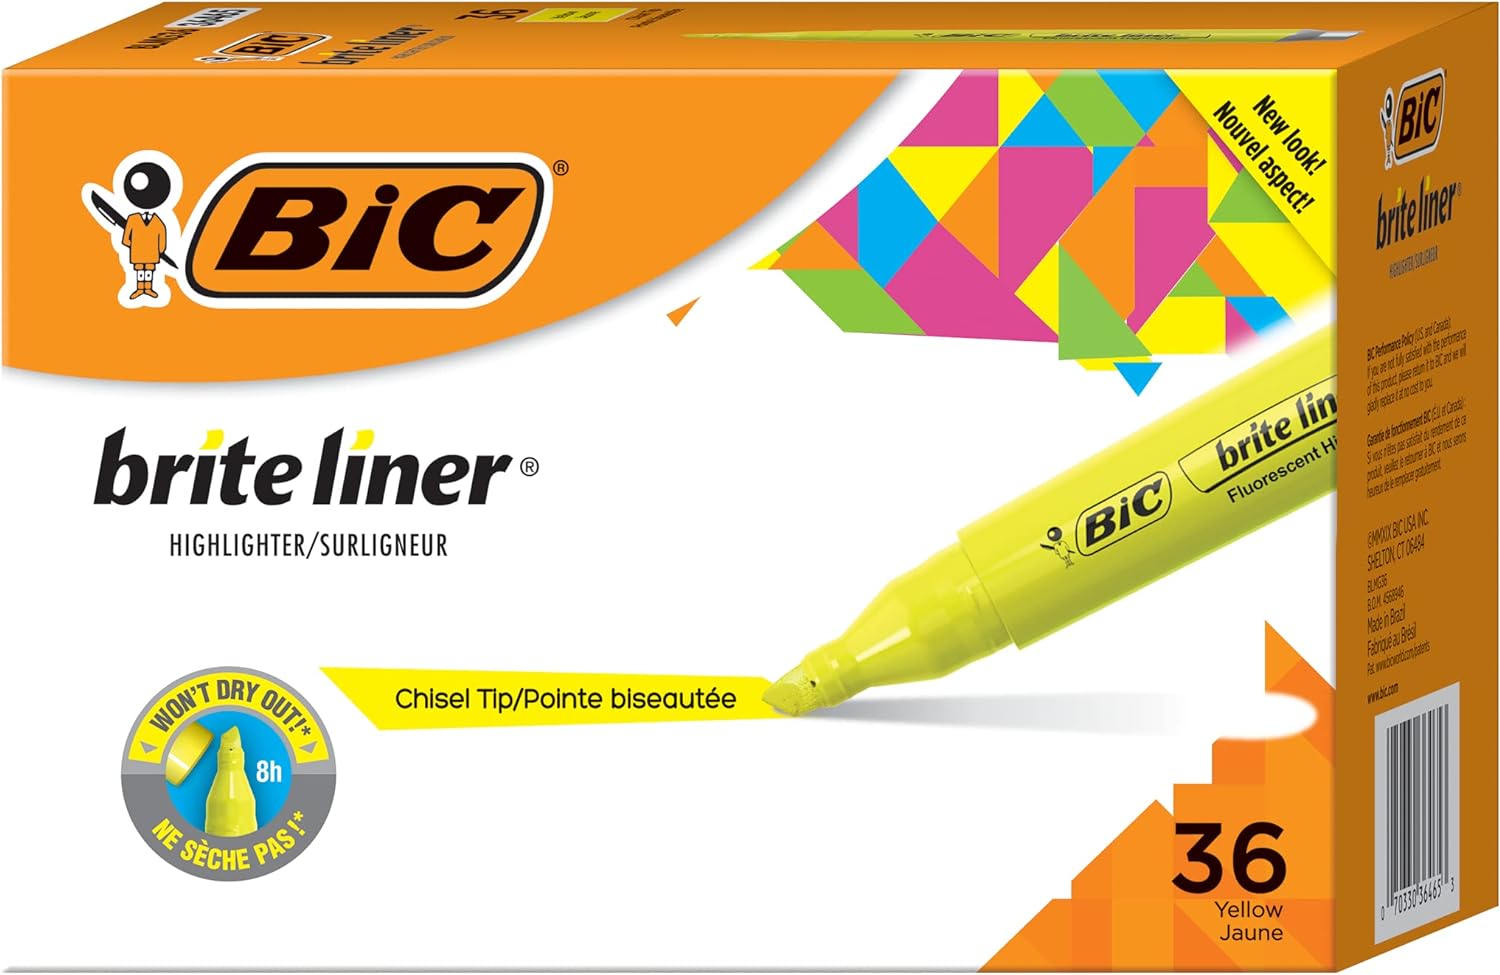 BIC Brite Liner Highlighter, Tank style, Chisel Tip, Box of 36 Yellow Highlighters